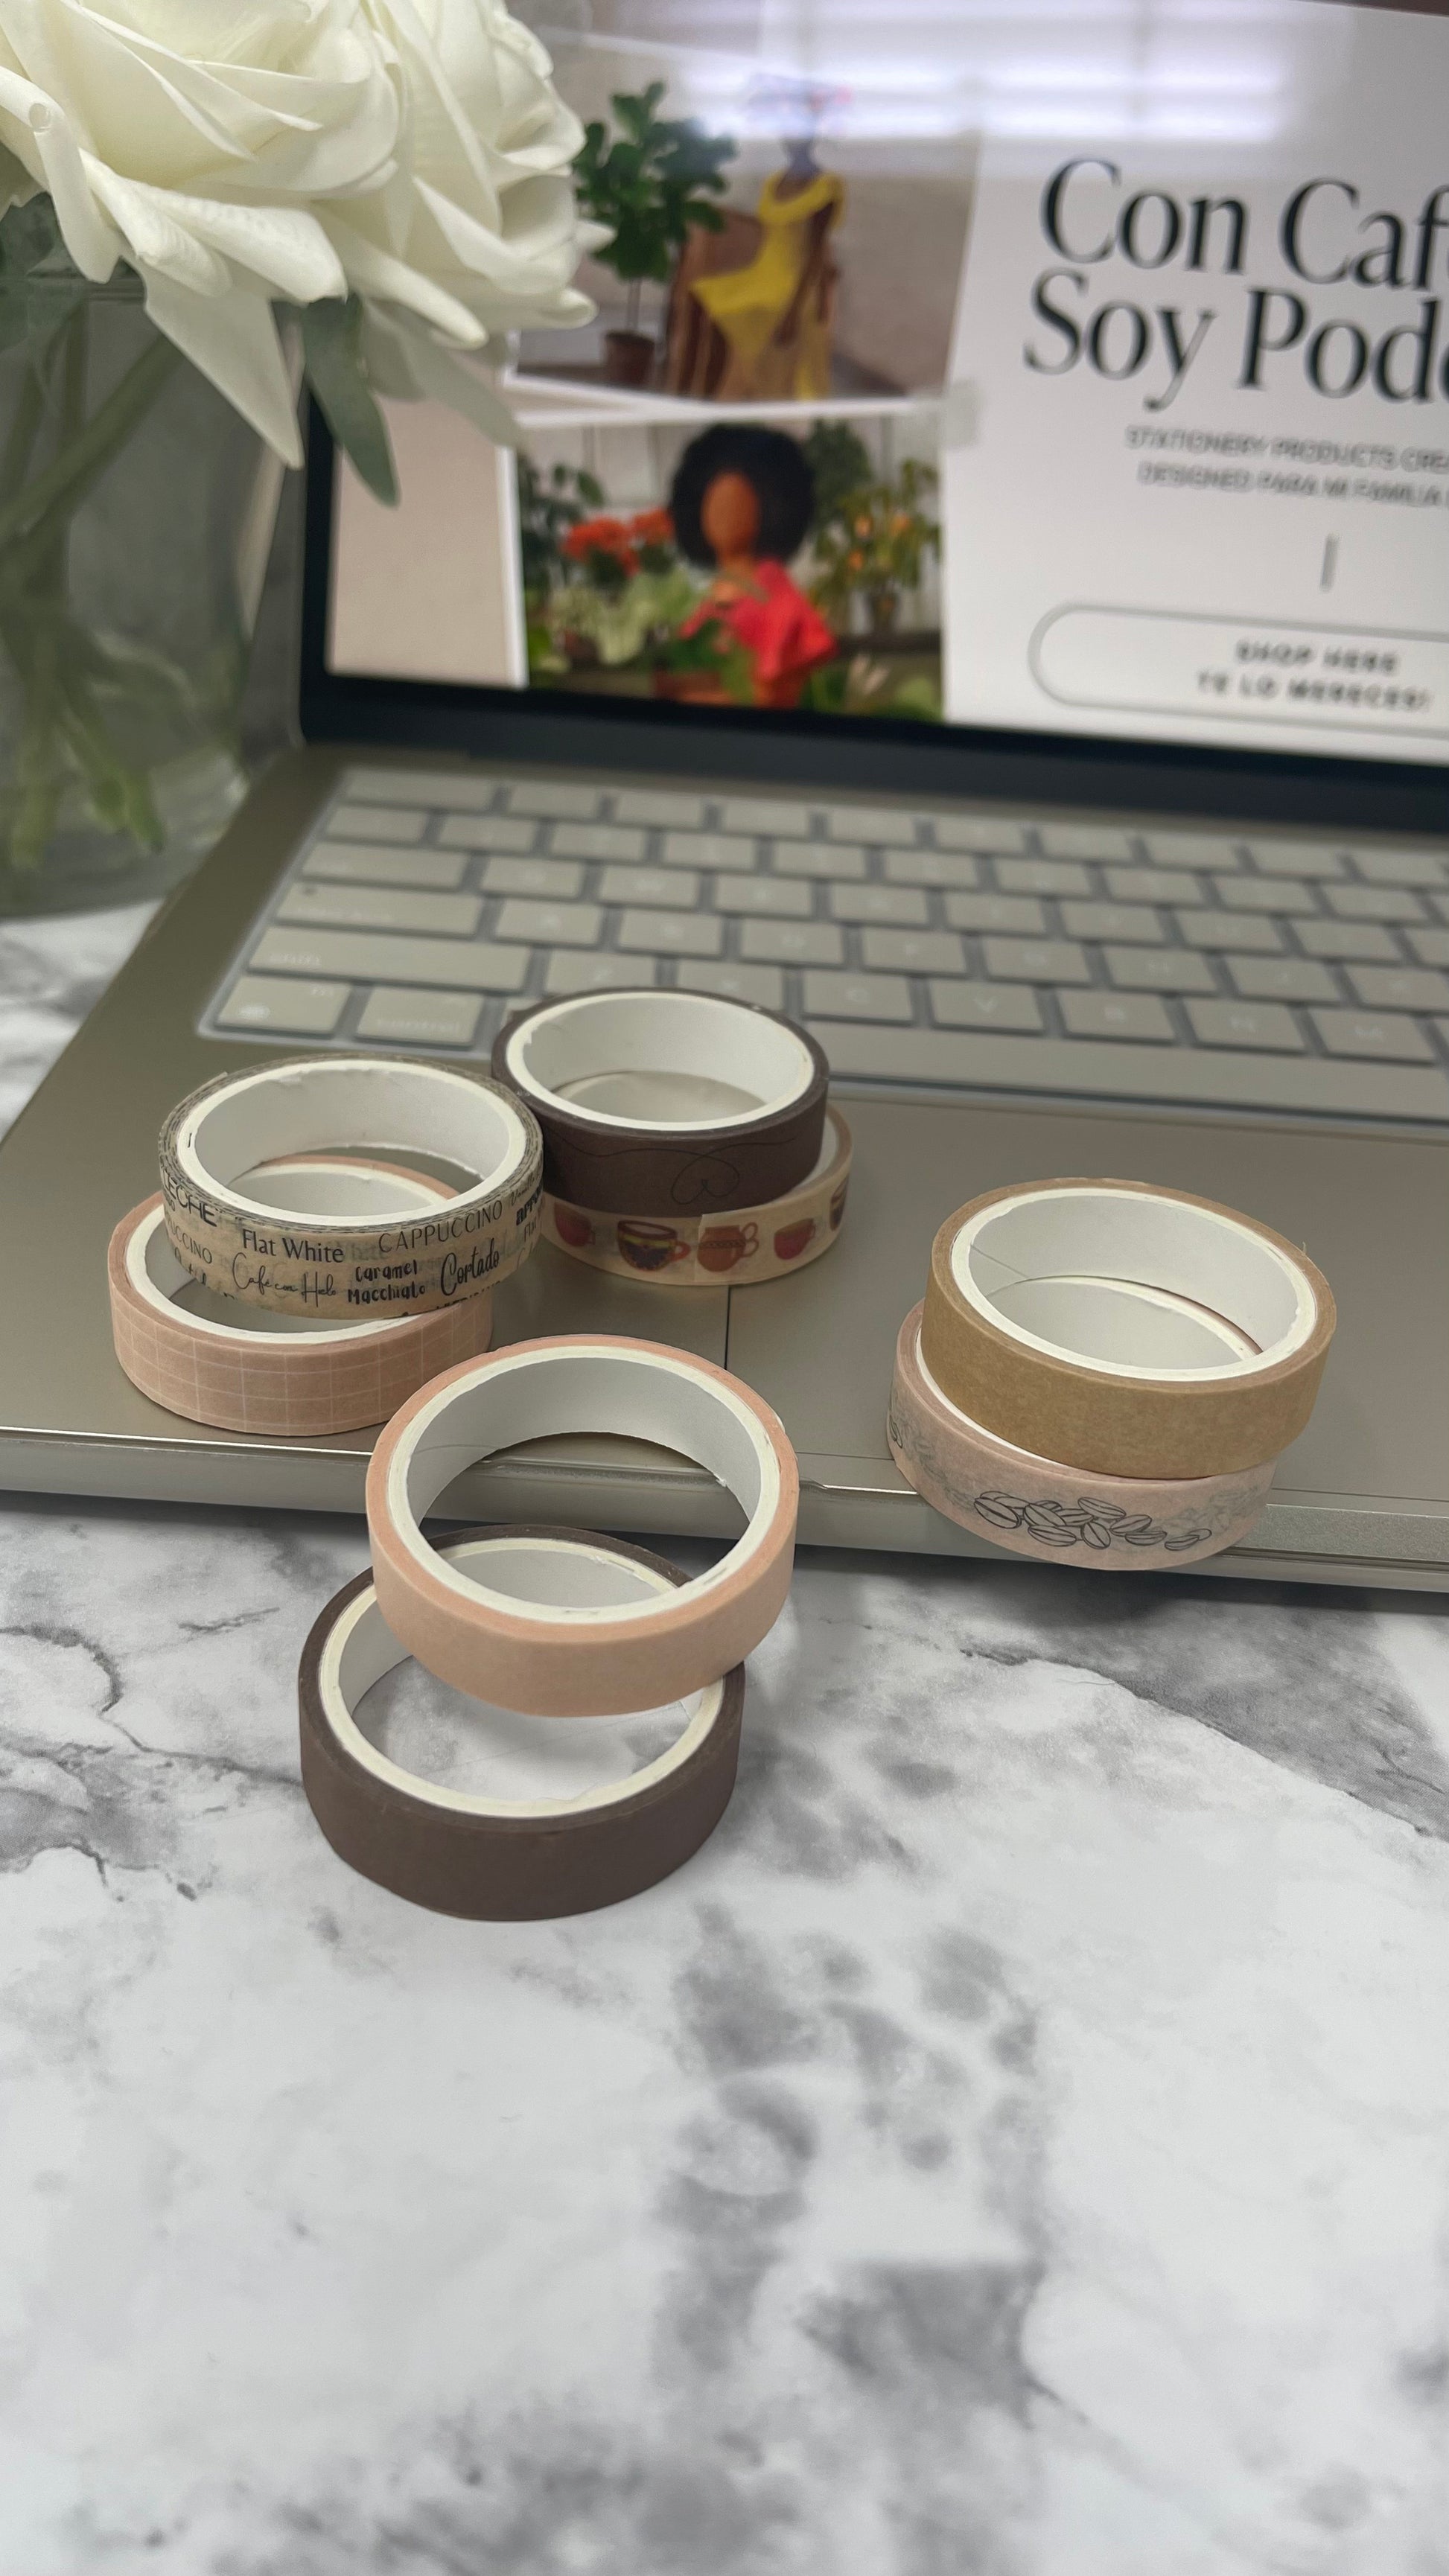 This pack of 8 different designs is perfect for adding a touch of style to your projects. They are perfect for decorating your agenda, bullet journal, or anything else. With their unique designs, these washi tapes are sure to make it your own.